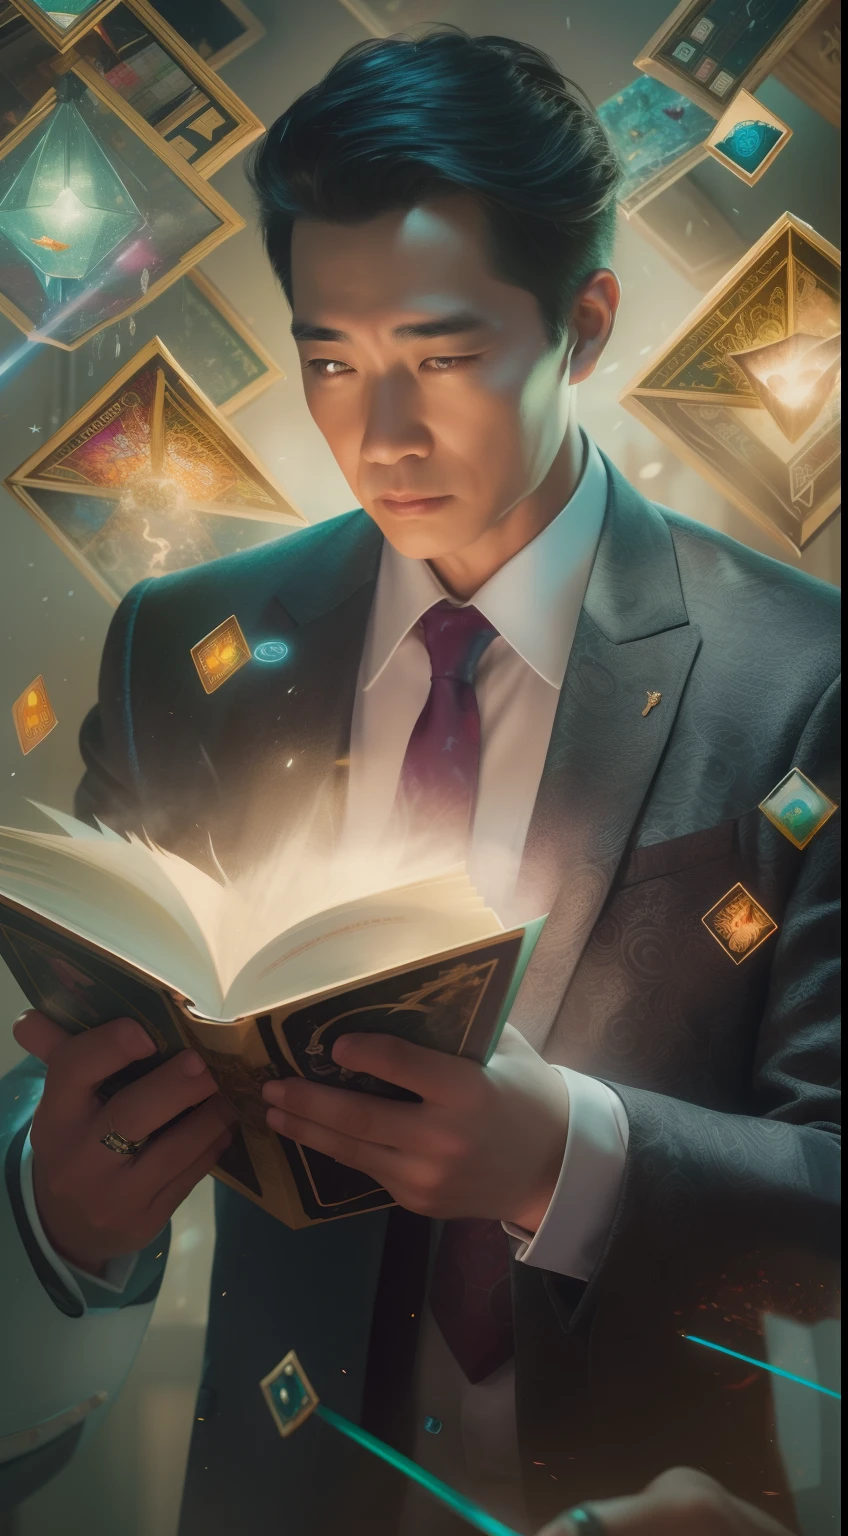 A detailed painting depicting a handsome, mature Asian man in a suit surrounded by a flurry of glowing Magic The Gathering cards and the book Dungeons and Dragons in the center.